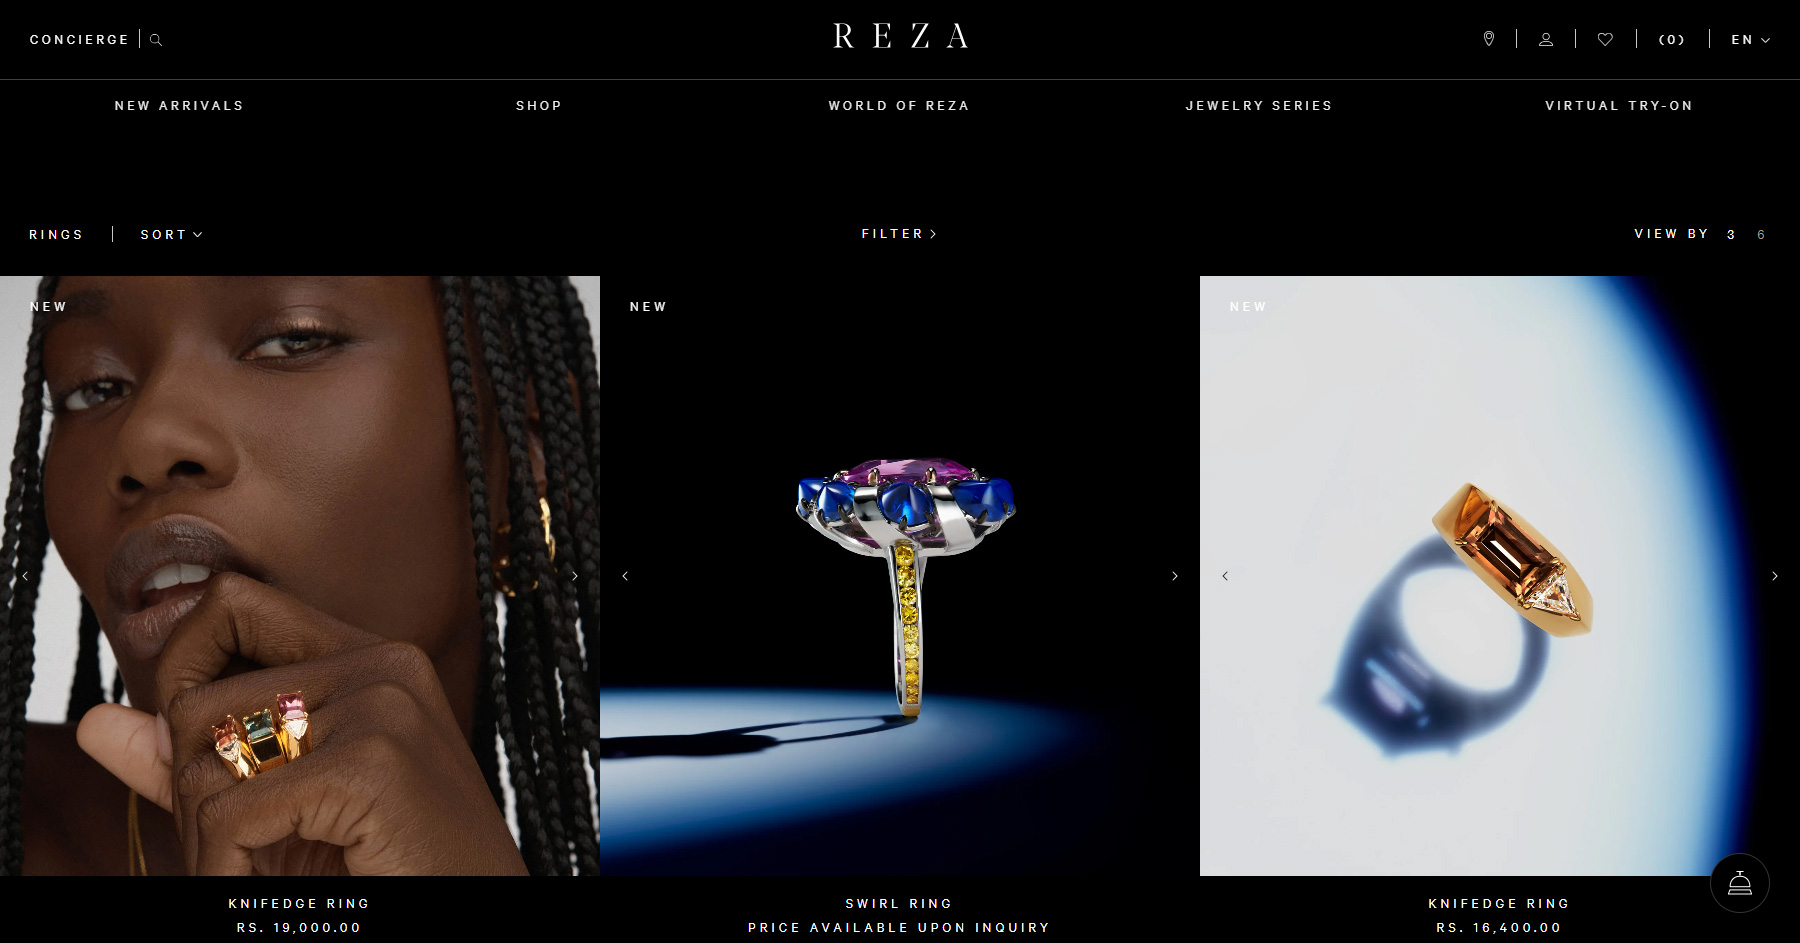 REZA - Website of the Day